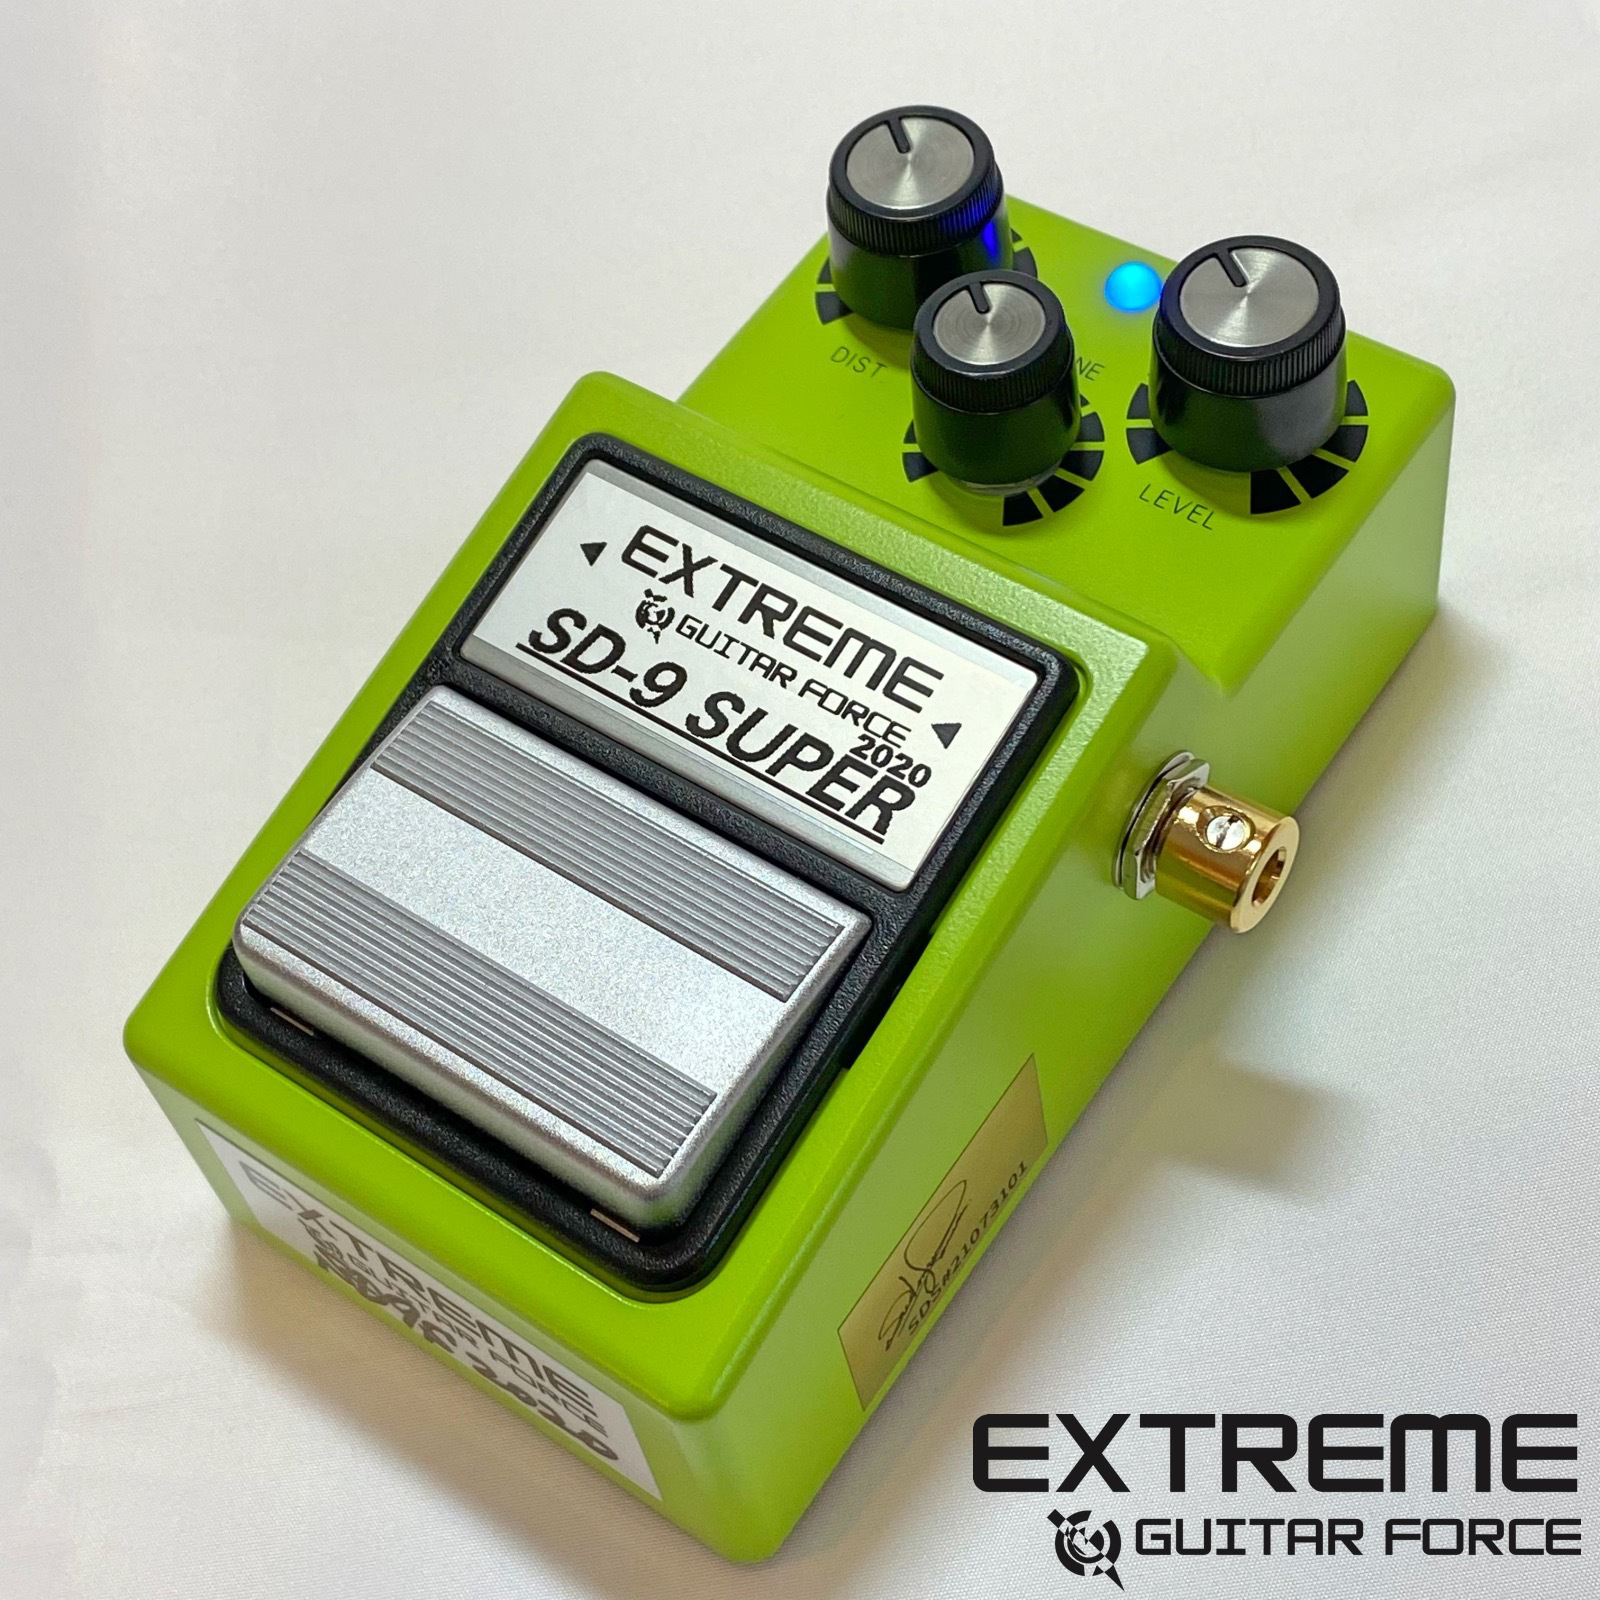 EXTREME GUITAR FORCE / SD-9